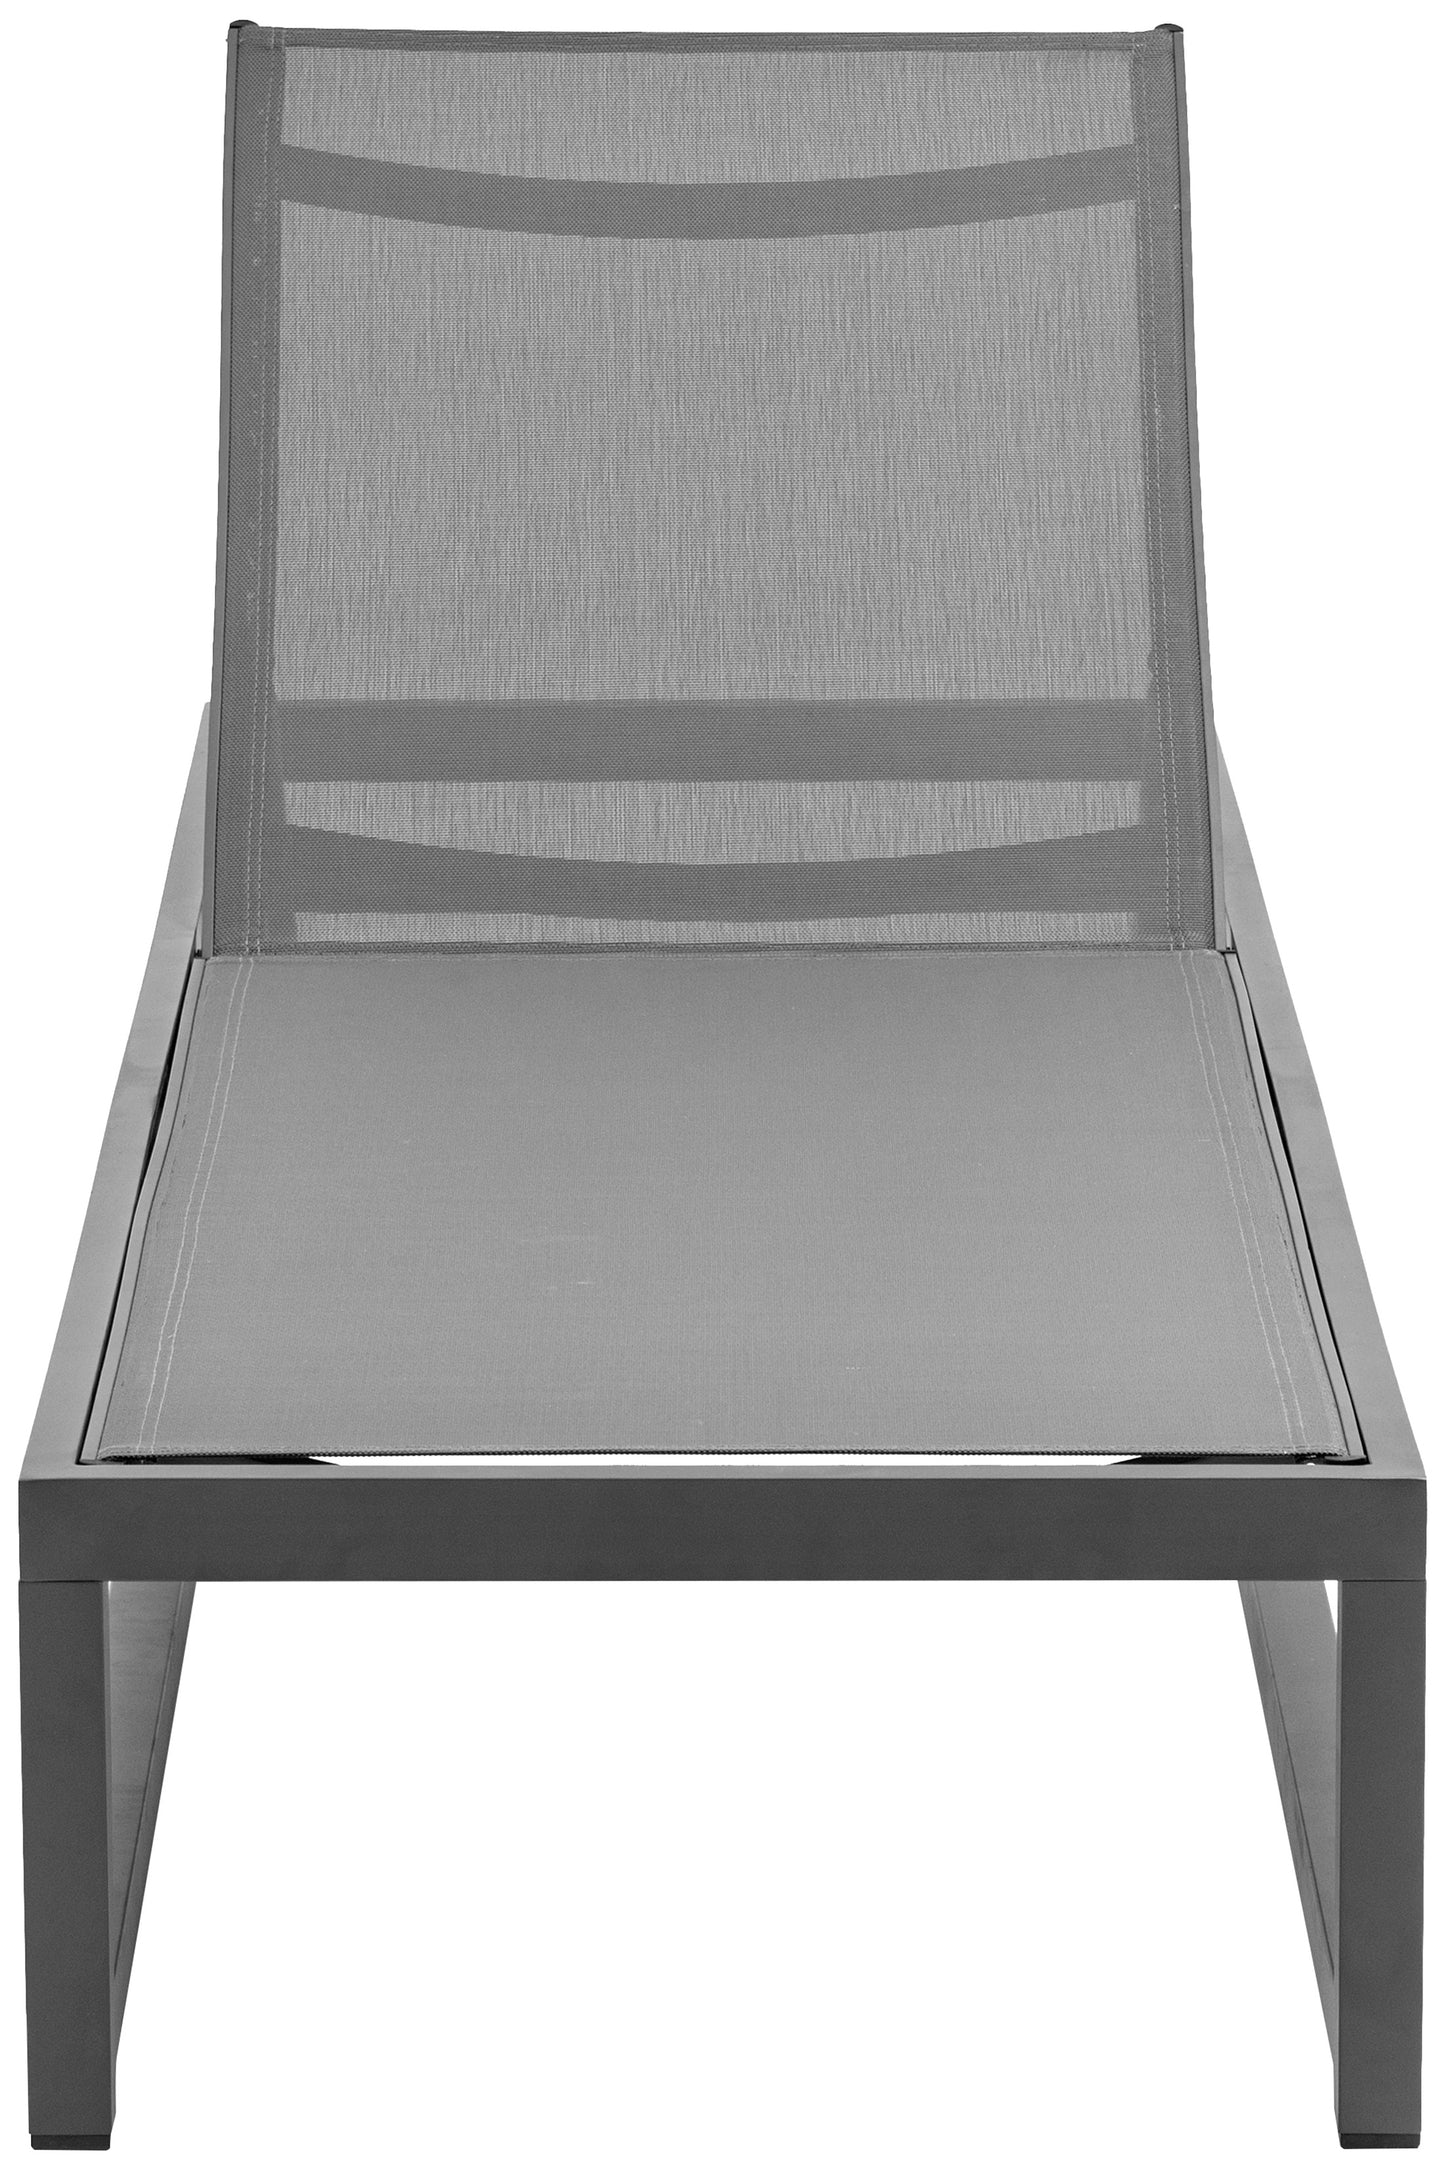 bethany grey mesh water resistant fabric outdoor patio adjustable sun chaise lounge chair grey